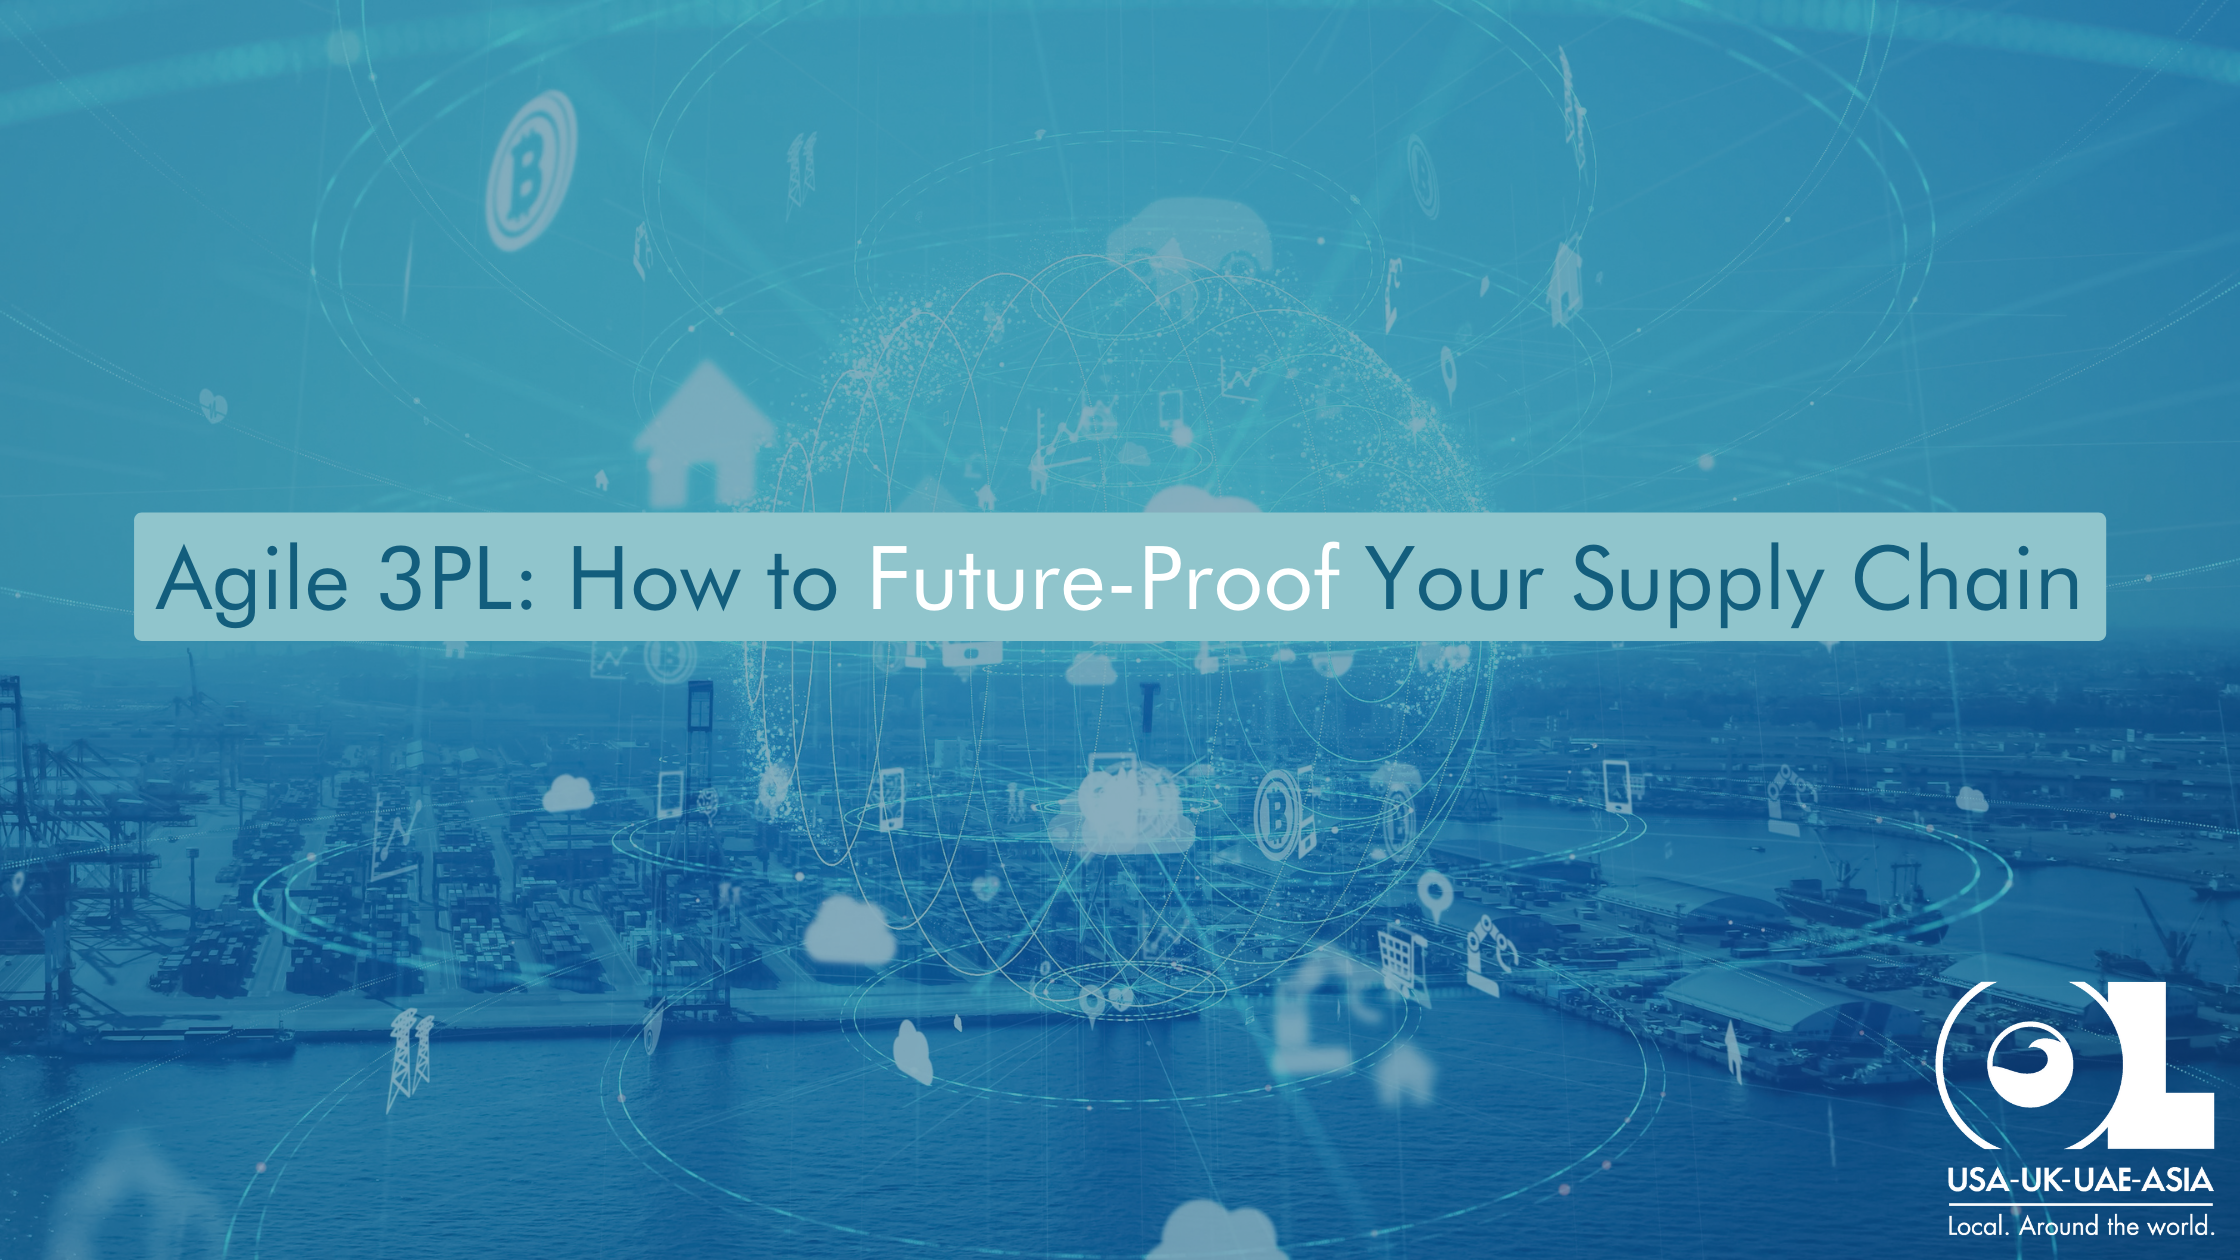 Agile-3PL-How-to-Future-Proof-Your-Supply-Chain-OL-USA